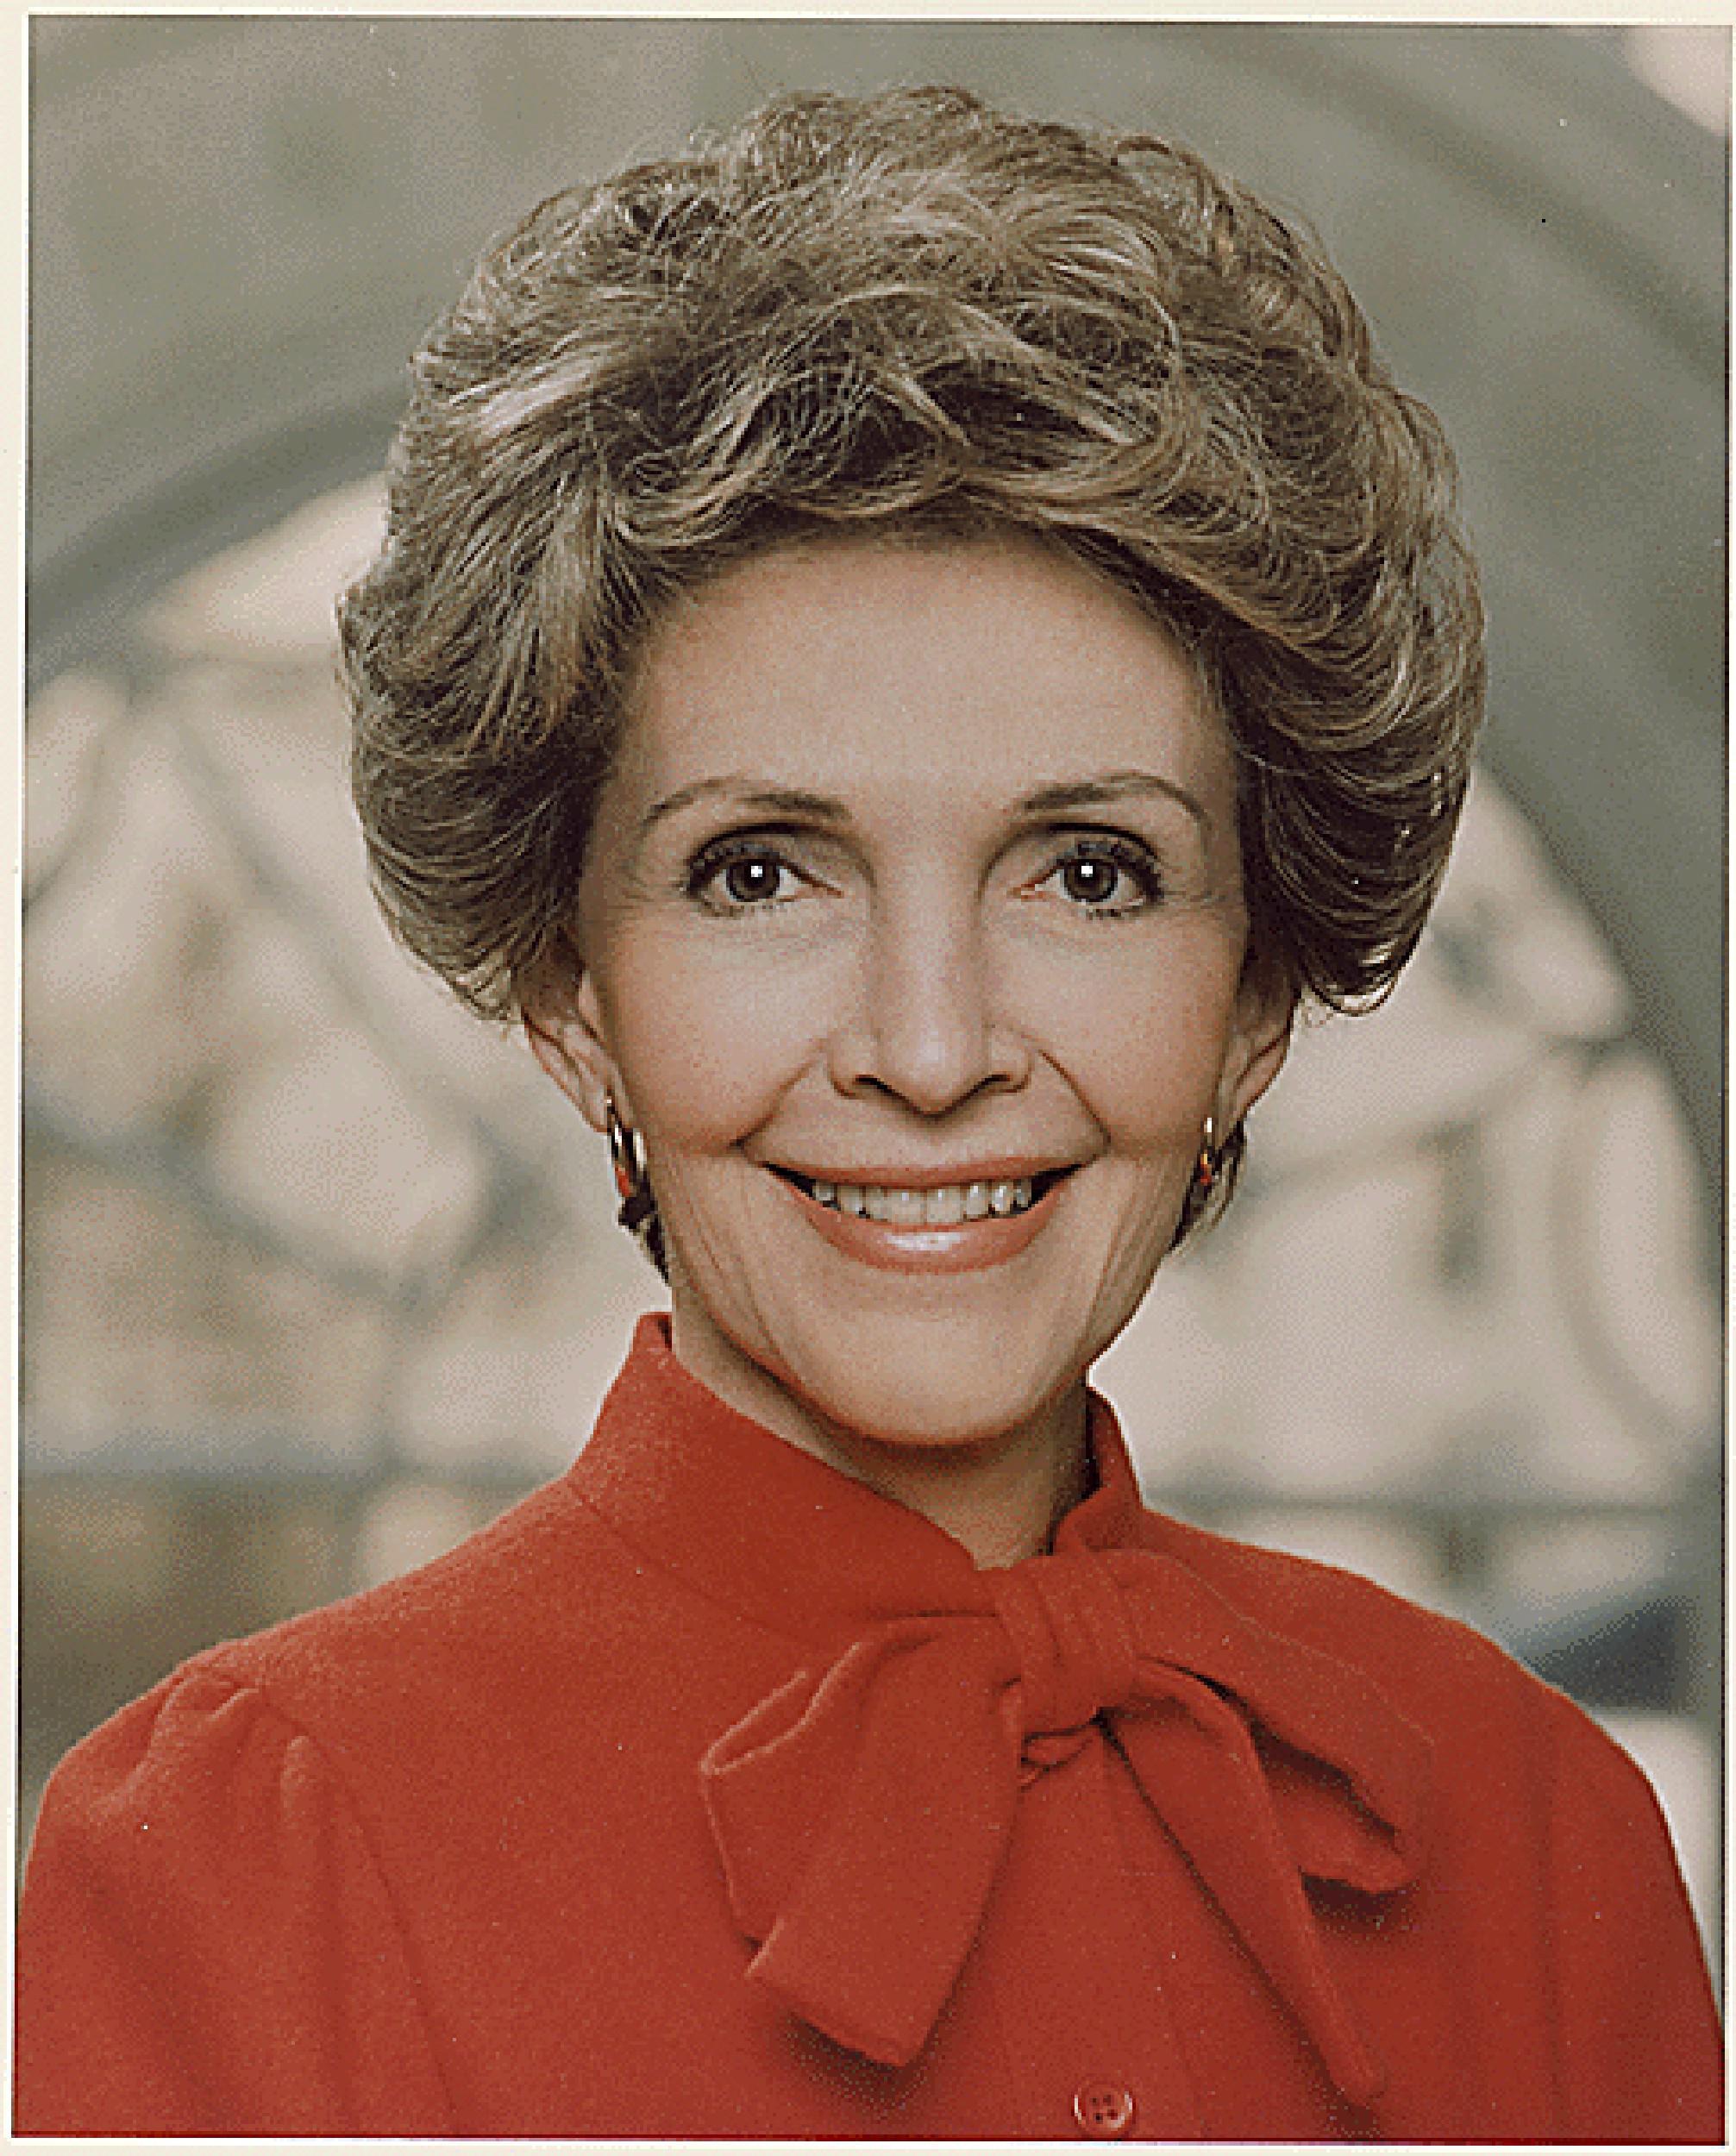 OFFICIAL PORTRAIT OF FIRST LADY NANCY REAGAN